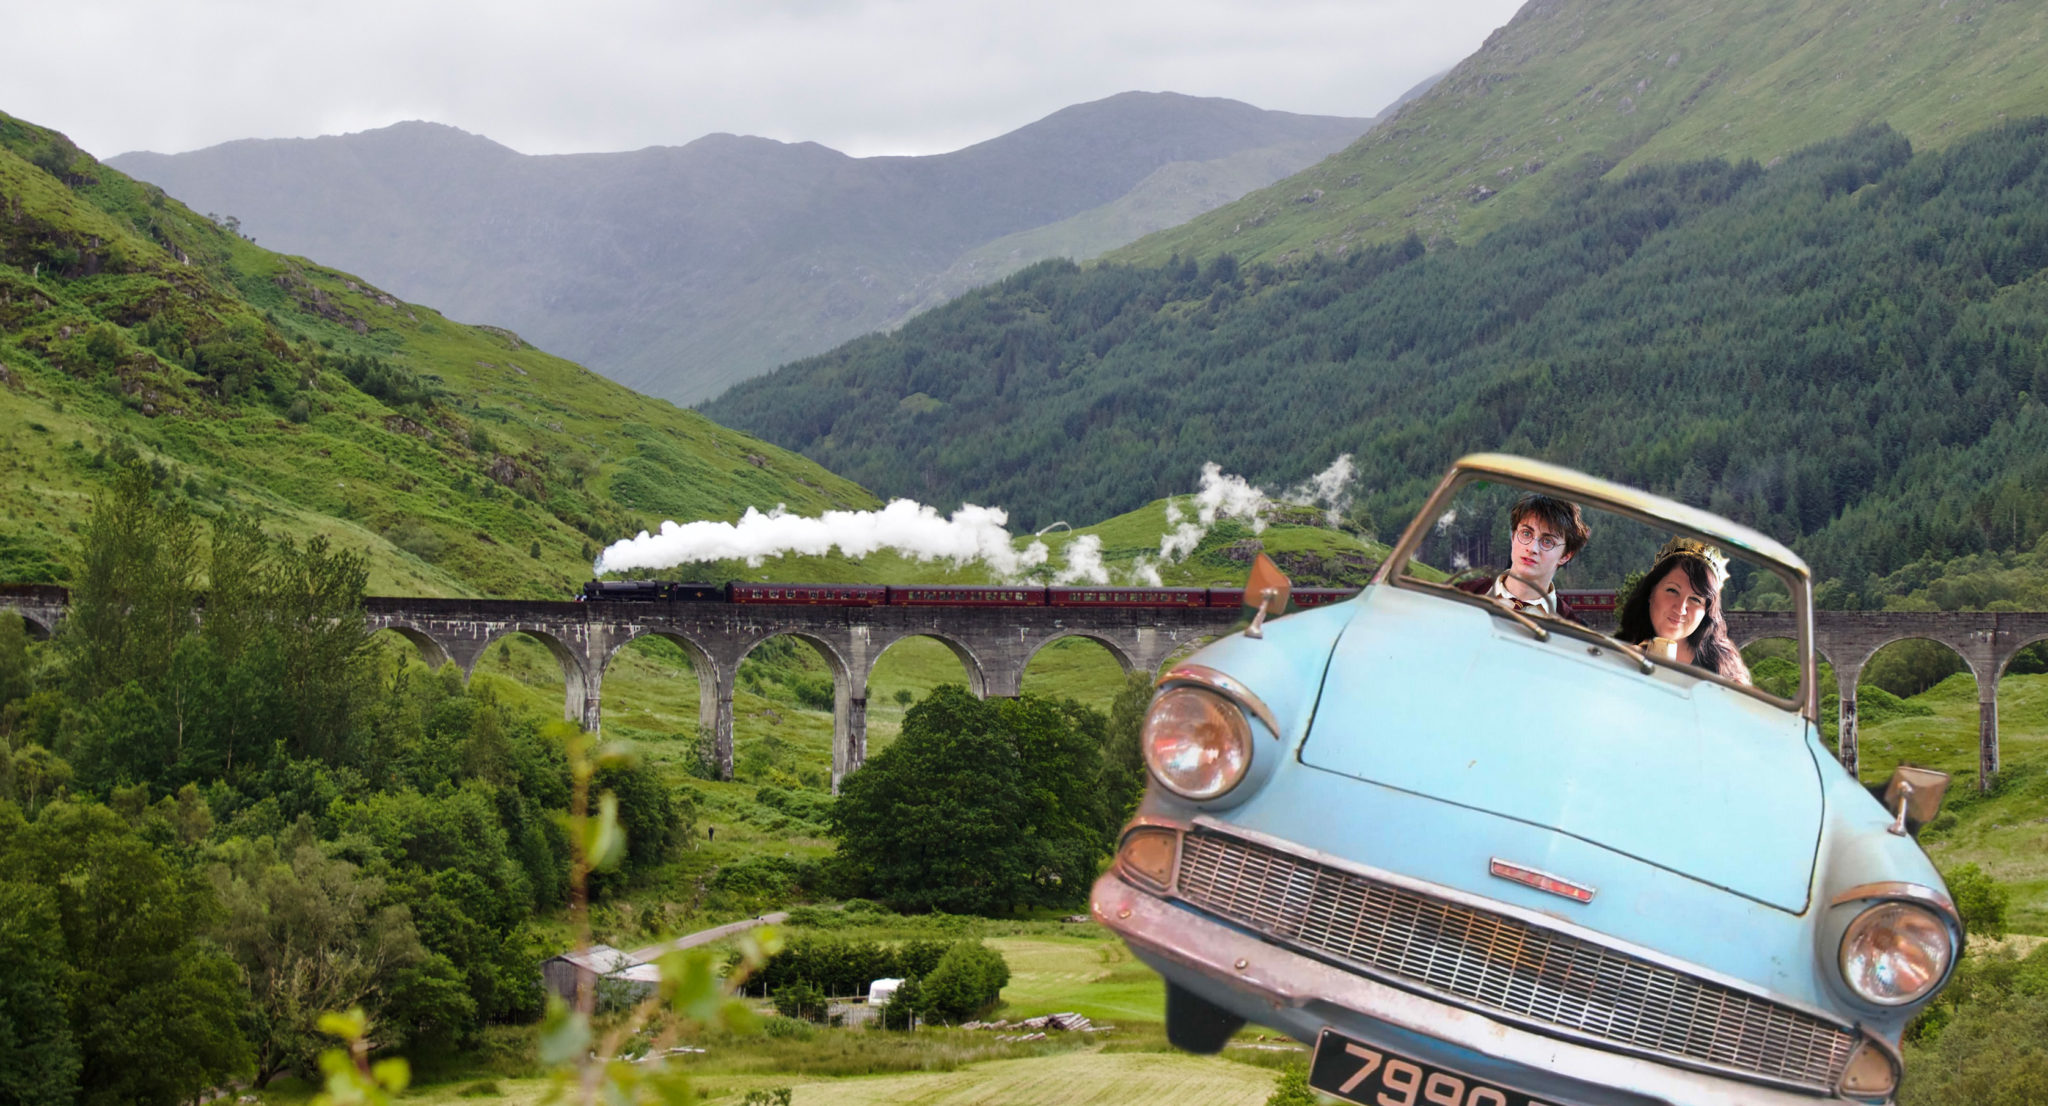 Potter & Me: A silly journey seeking all things Potter in Scotland